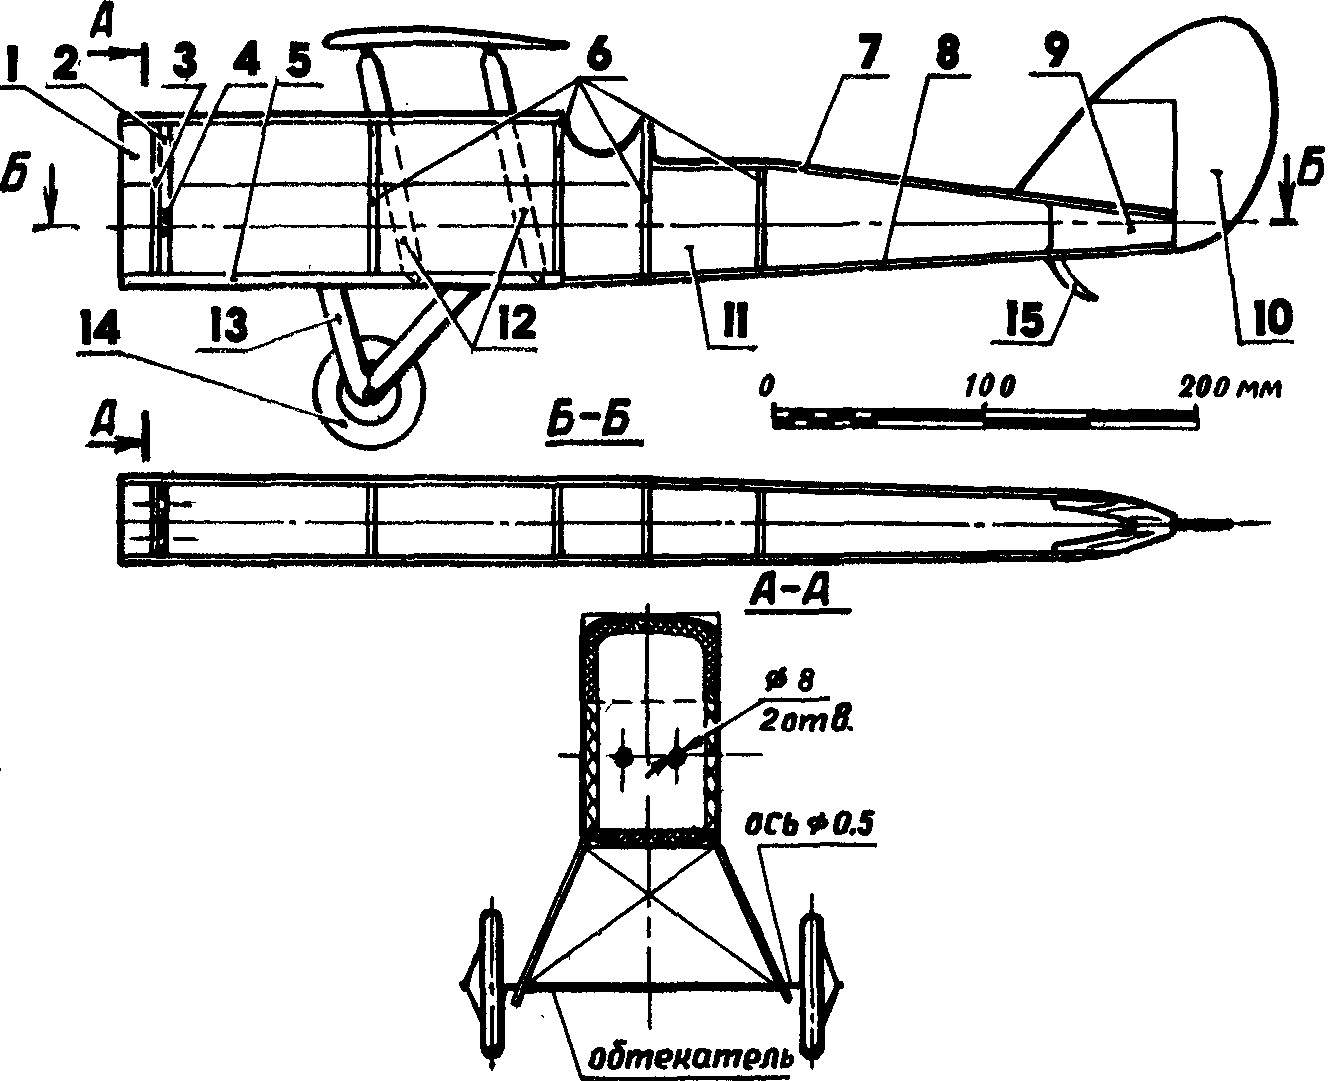 Fig. 2. The design of the fuselage.